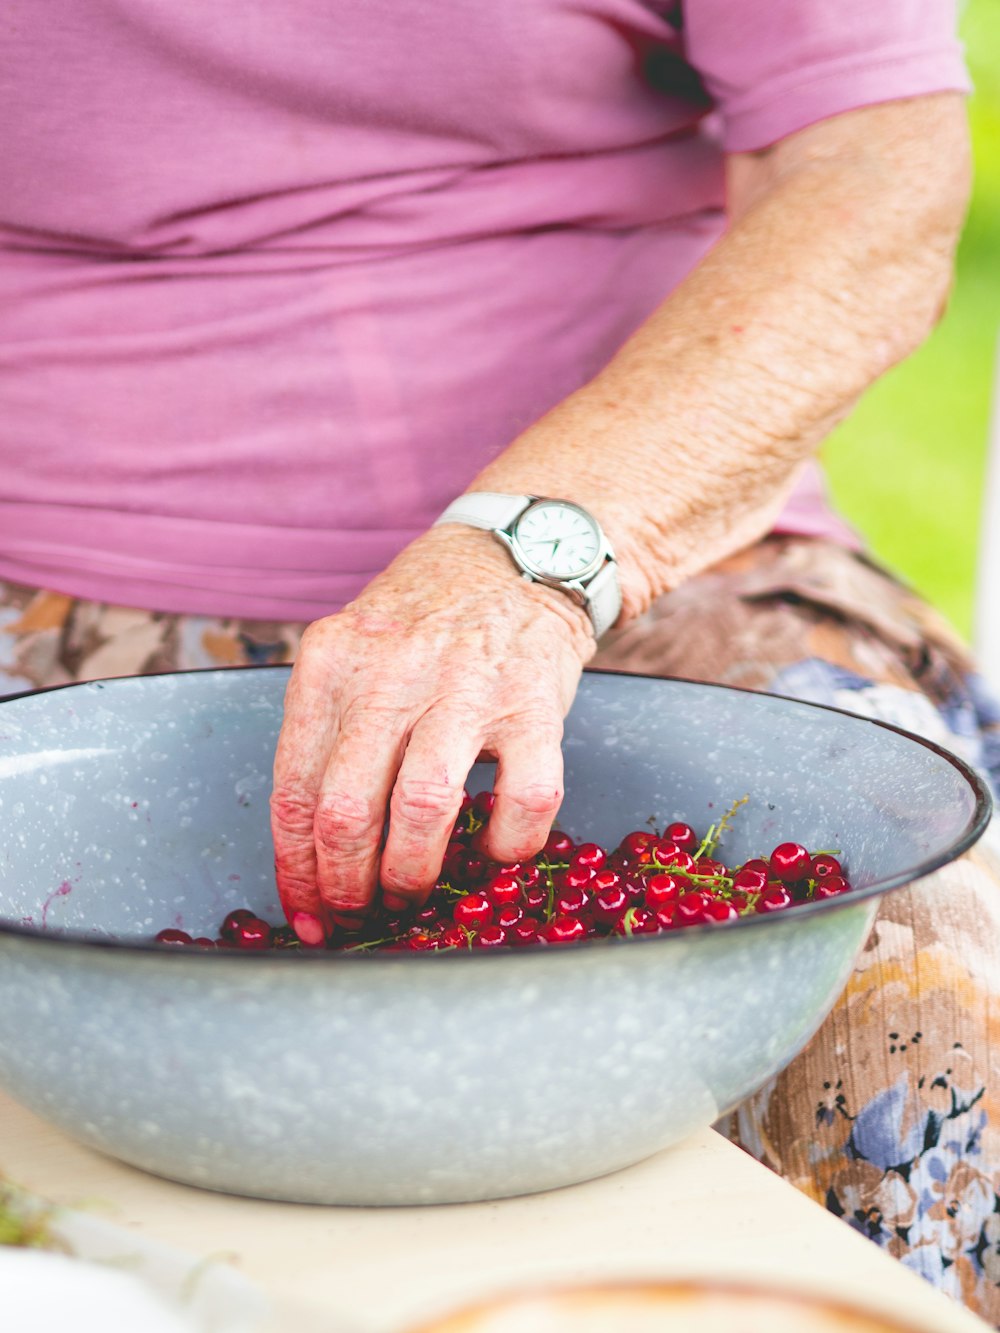 person in purple shirt holding bowl with red fruits